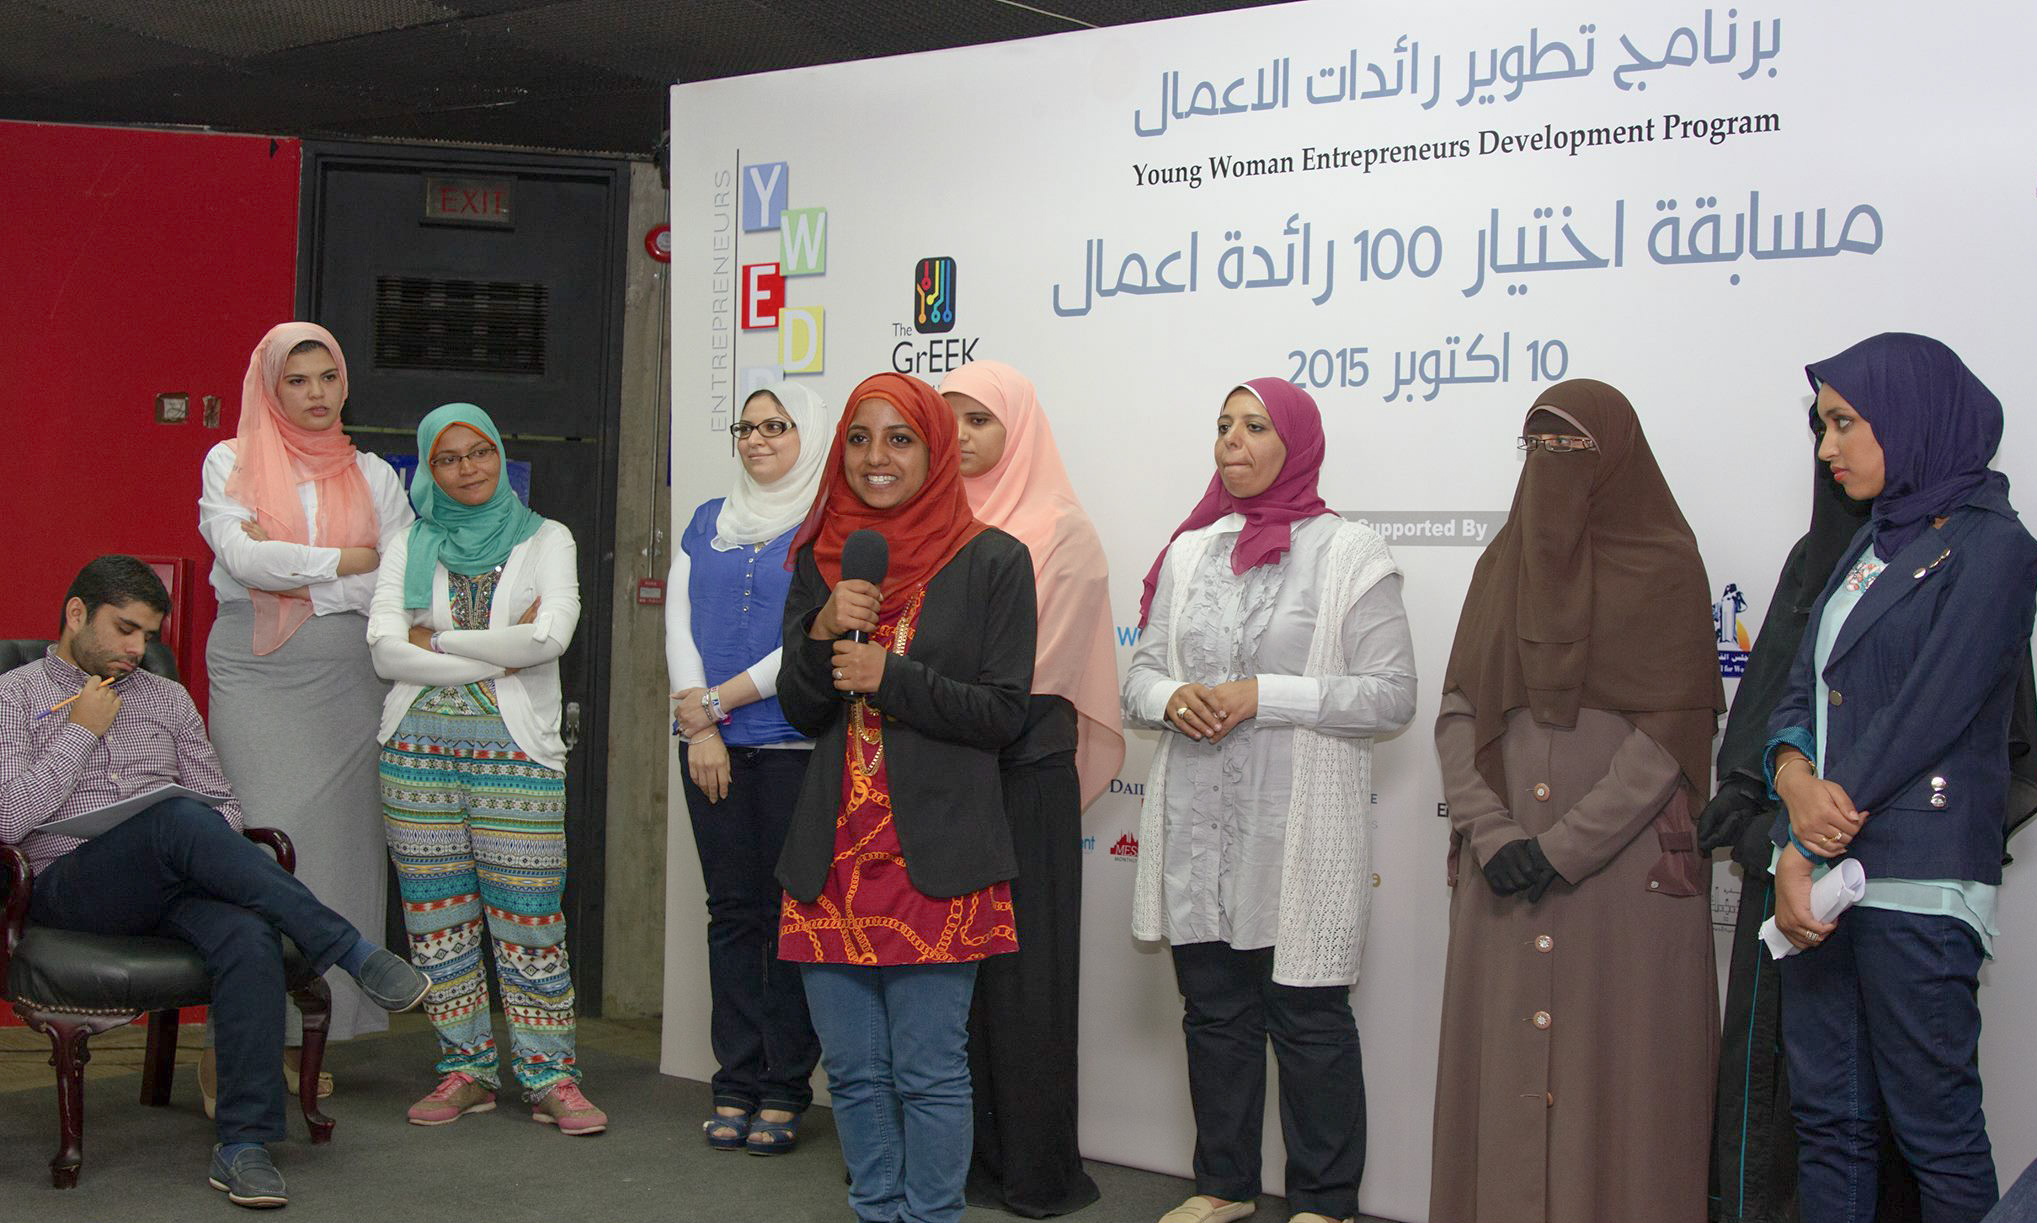 Young women entrepreneurs from Upper Egypt and rural areas pitching their business ideas at the Greek Campus, October 11, 2015.